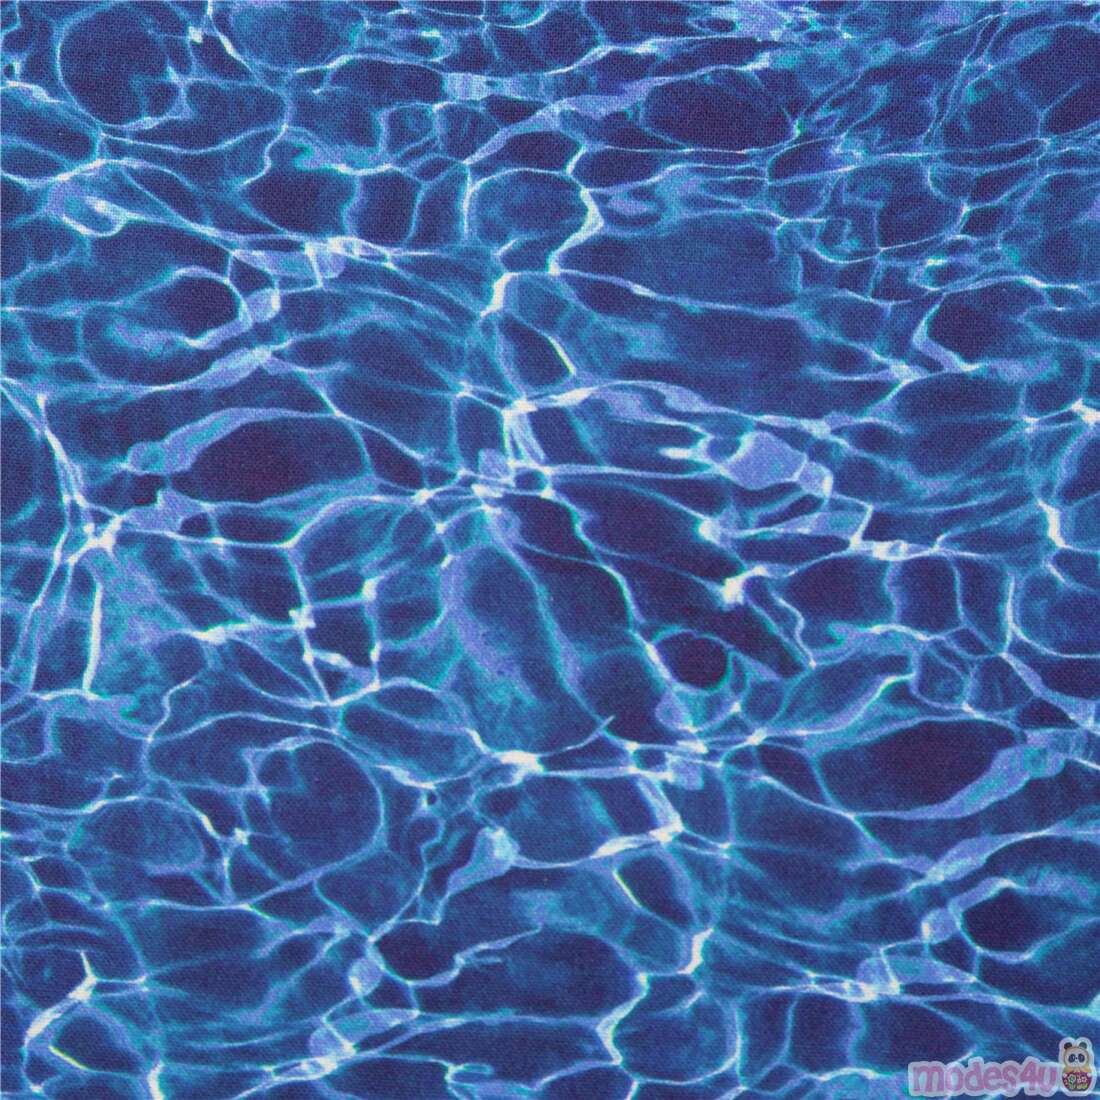 water reflection on blue background by Quilting Treasures swimming pool  effect - modeS4u